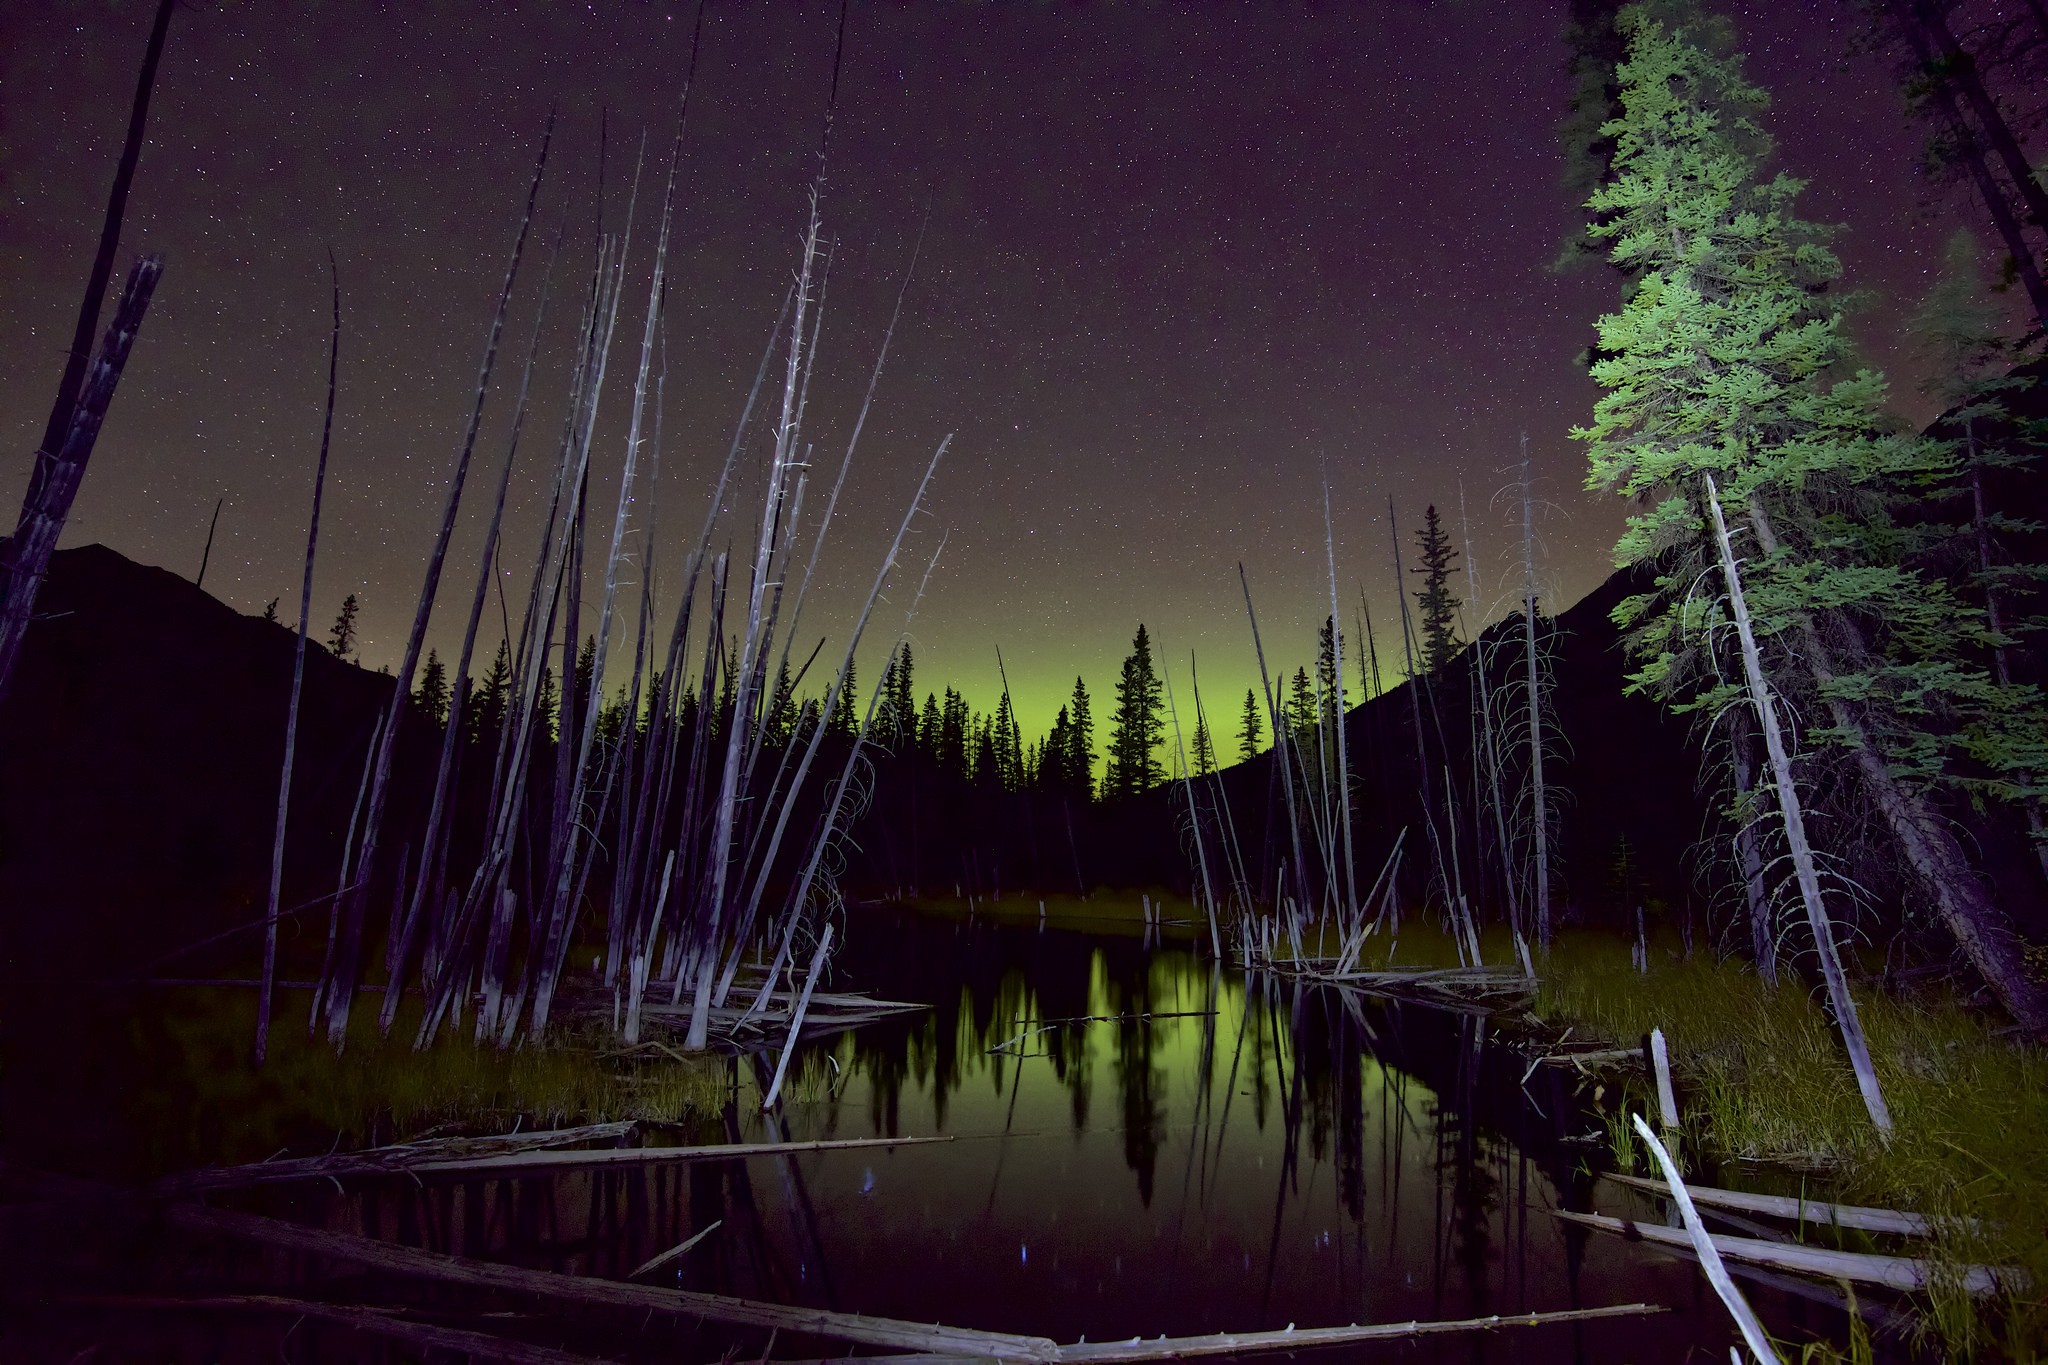 General 2048x1365 river night dead trees pine trees silhouette spooky nature low light